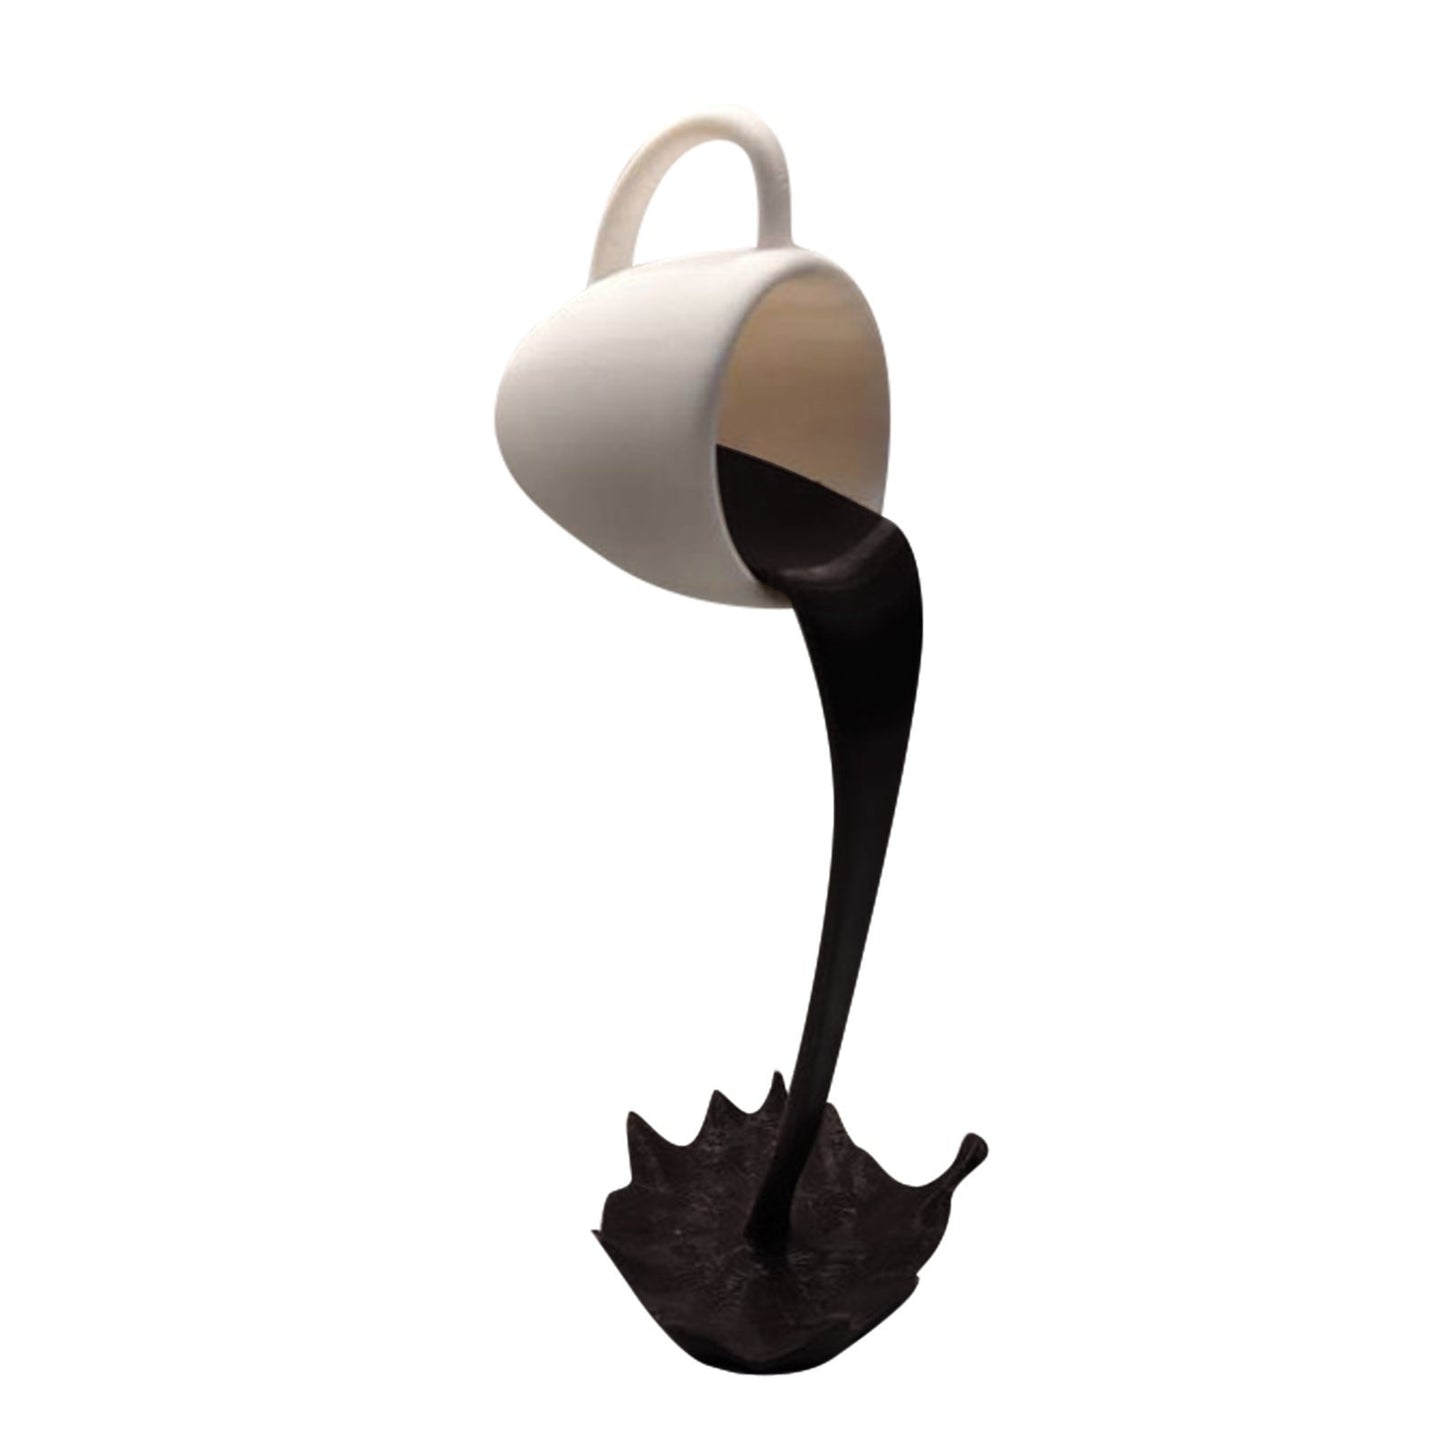 Floating Spilling Coffee Cup